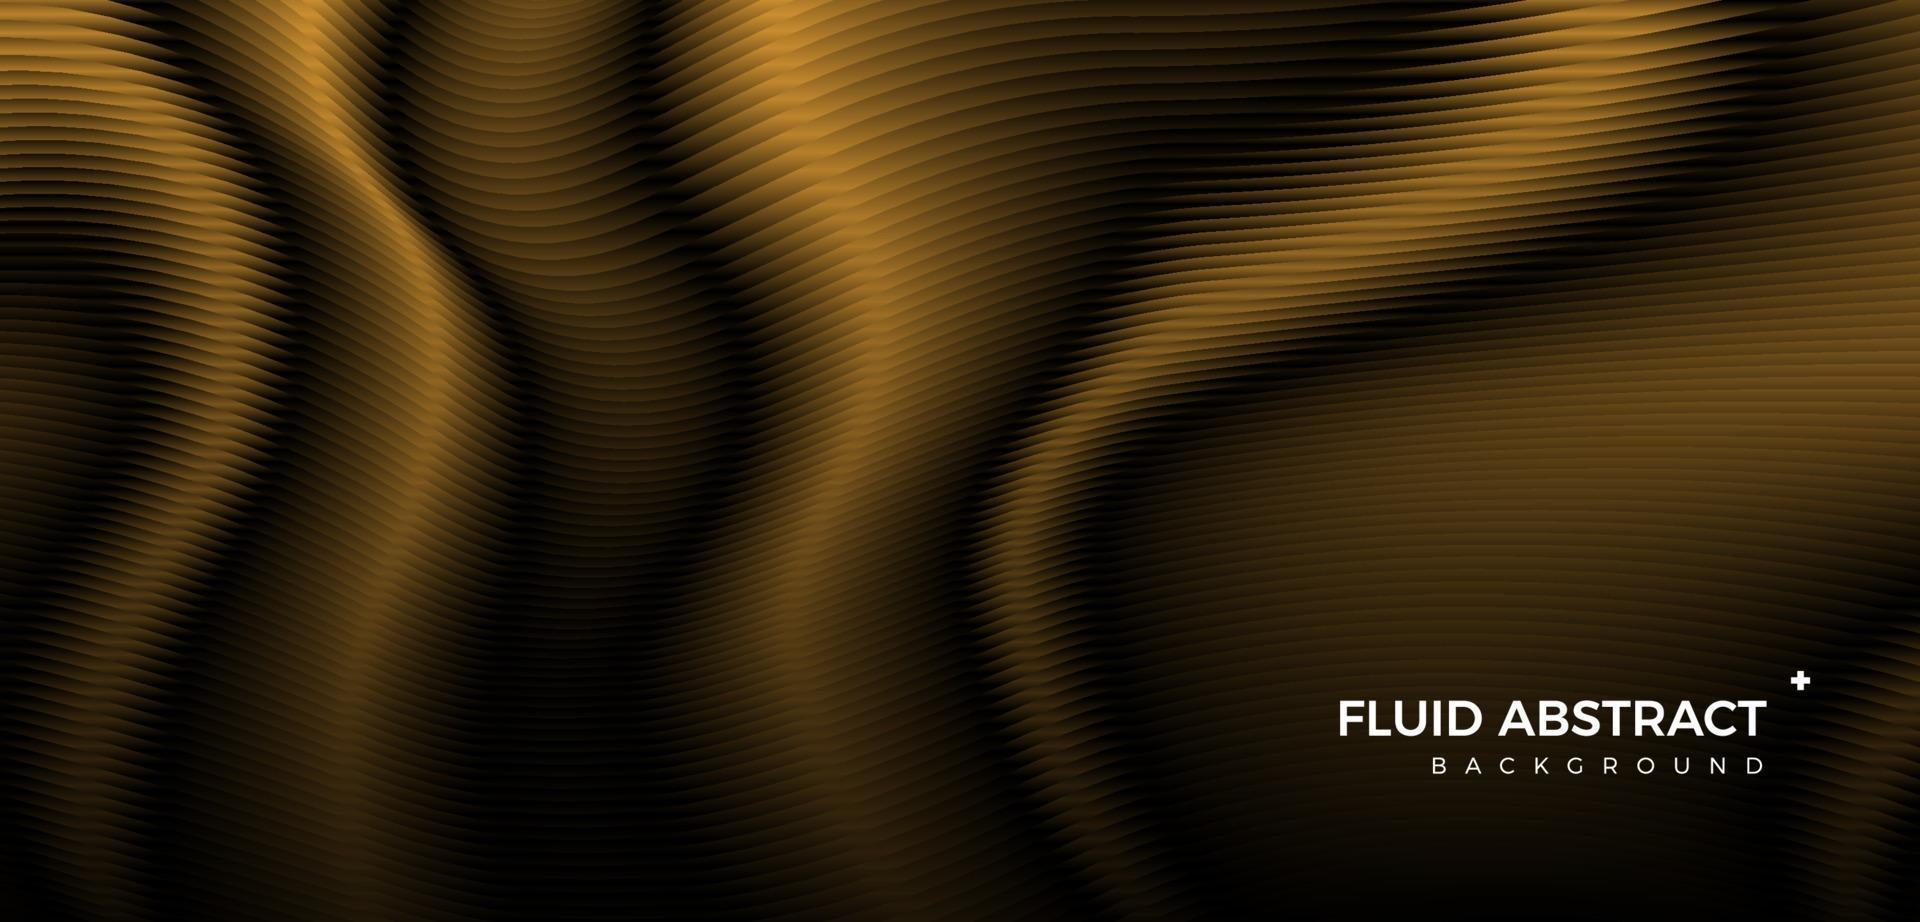 Stylish corrugated motion high-grade black gold mixed fluid gradient abstract background vector